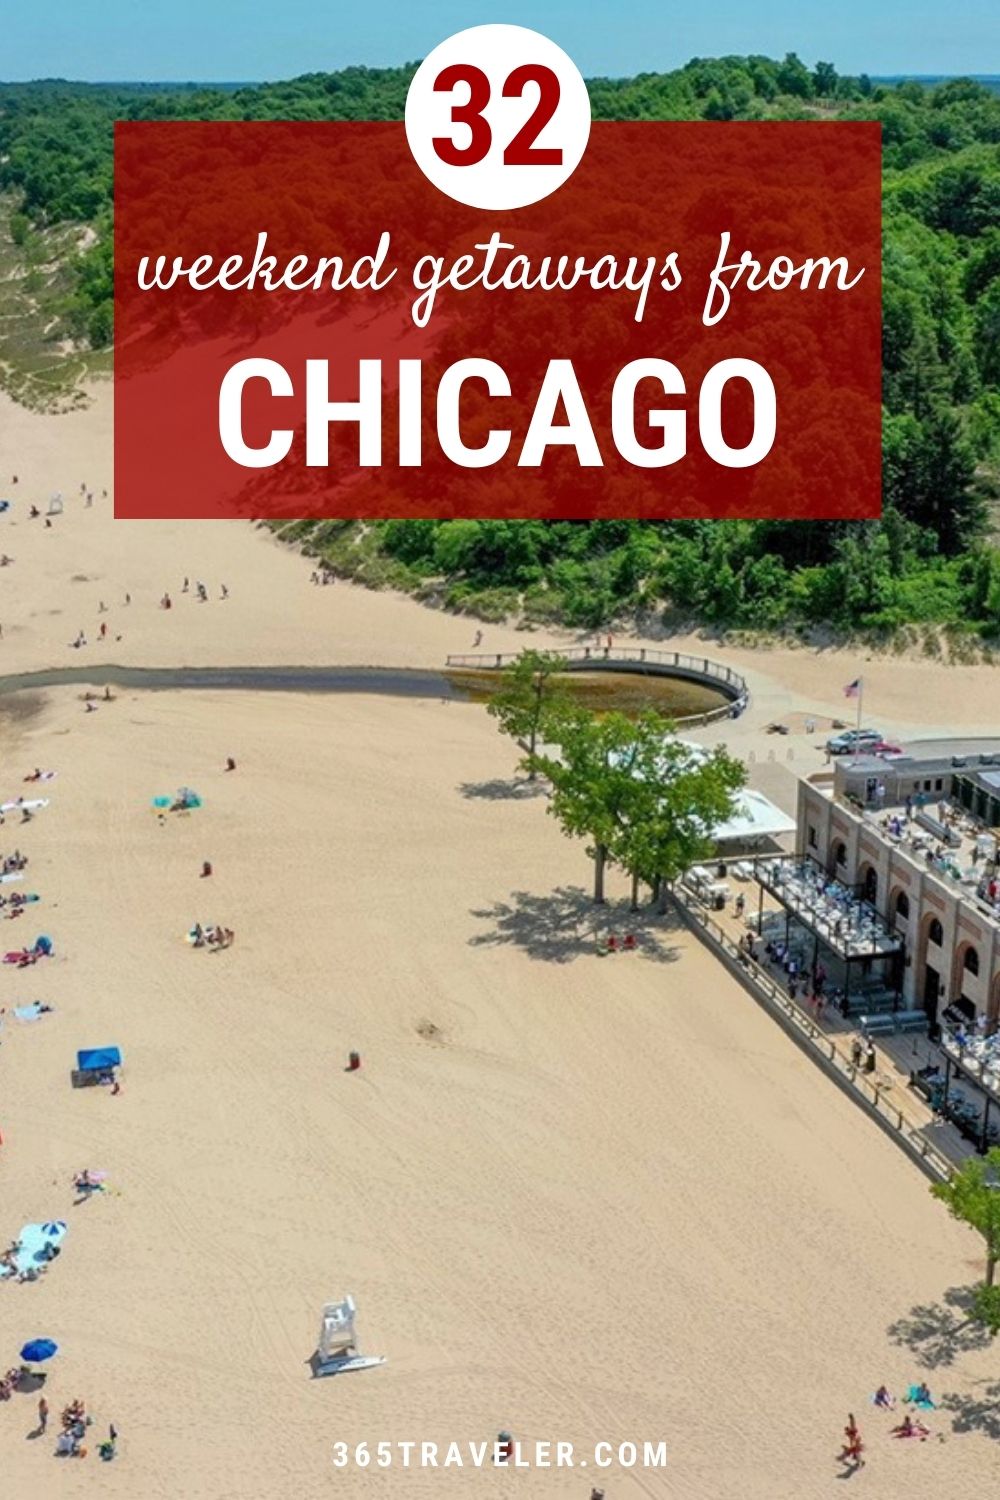 32 AWESOME & FUN WEEKEND GETAWAYS FROM CHICAGO